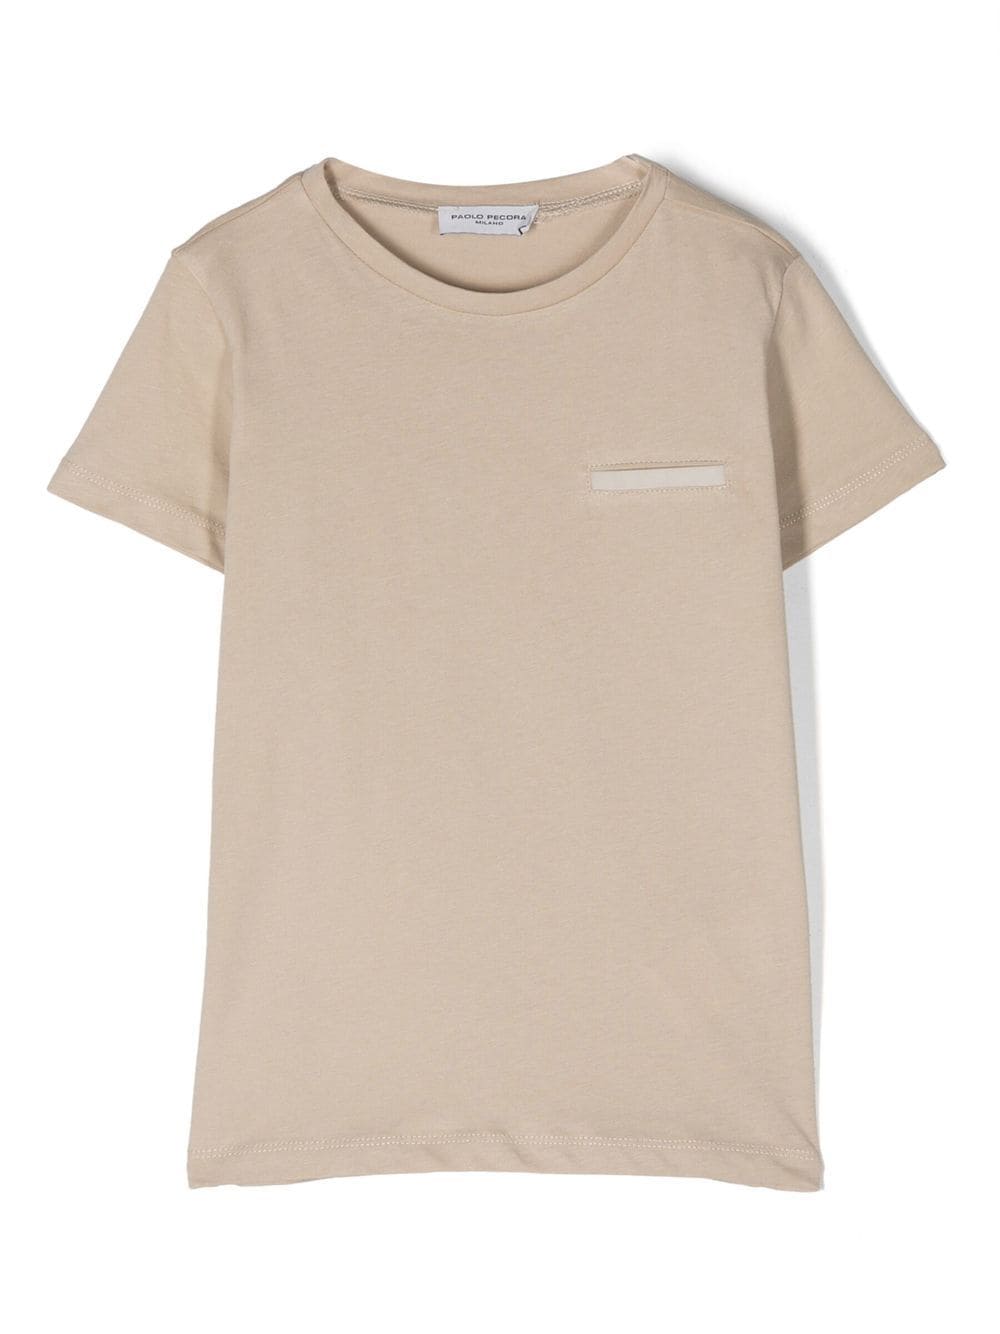 Paolo Pecora Kids' Shortsleeved Cotton T-shirt In Beige